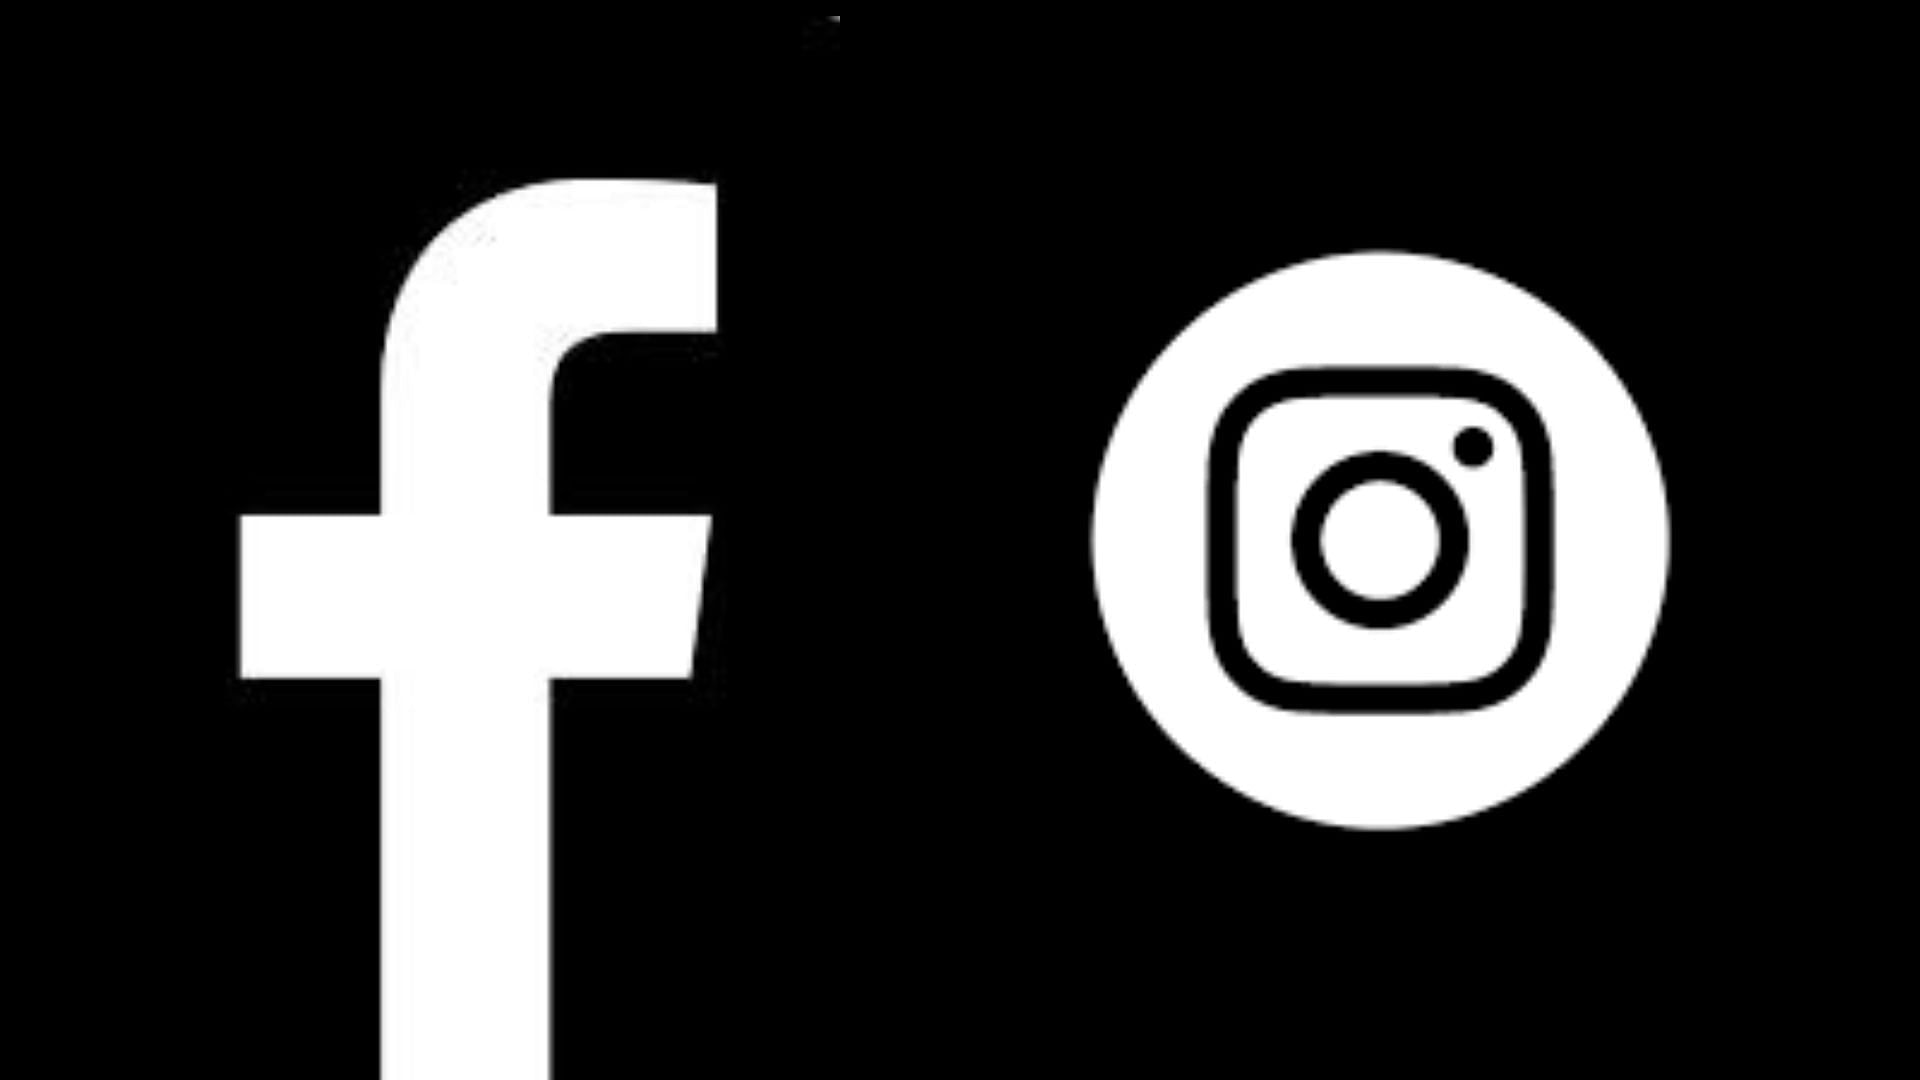 Black and white facebook and instagram logo on black background